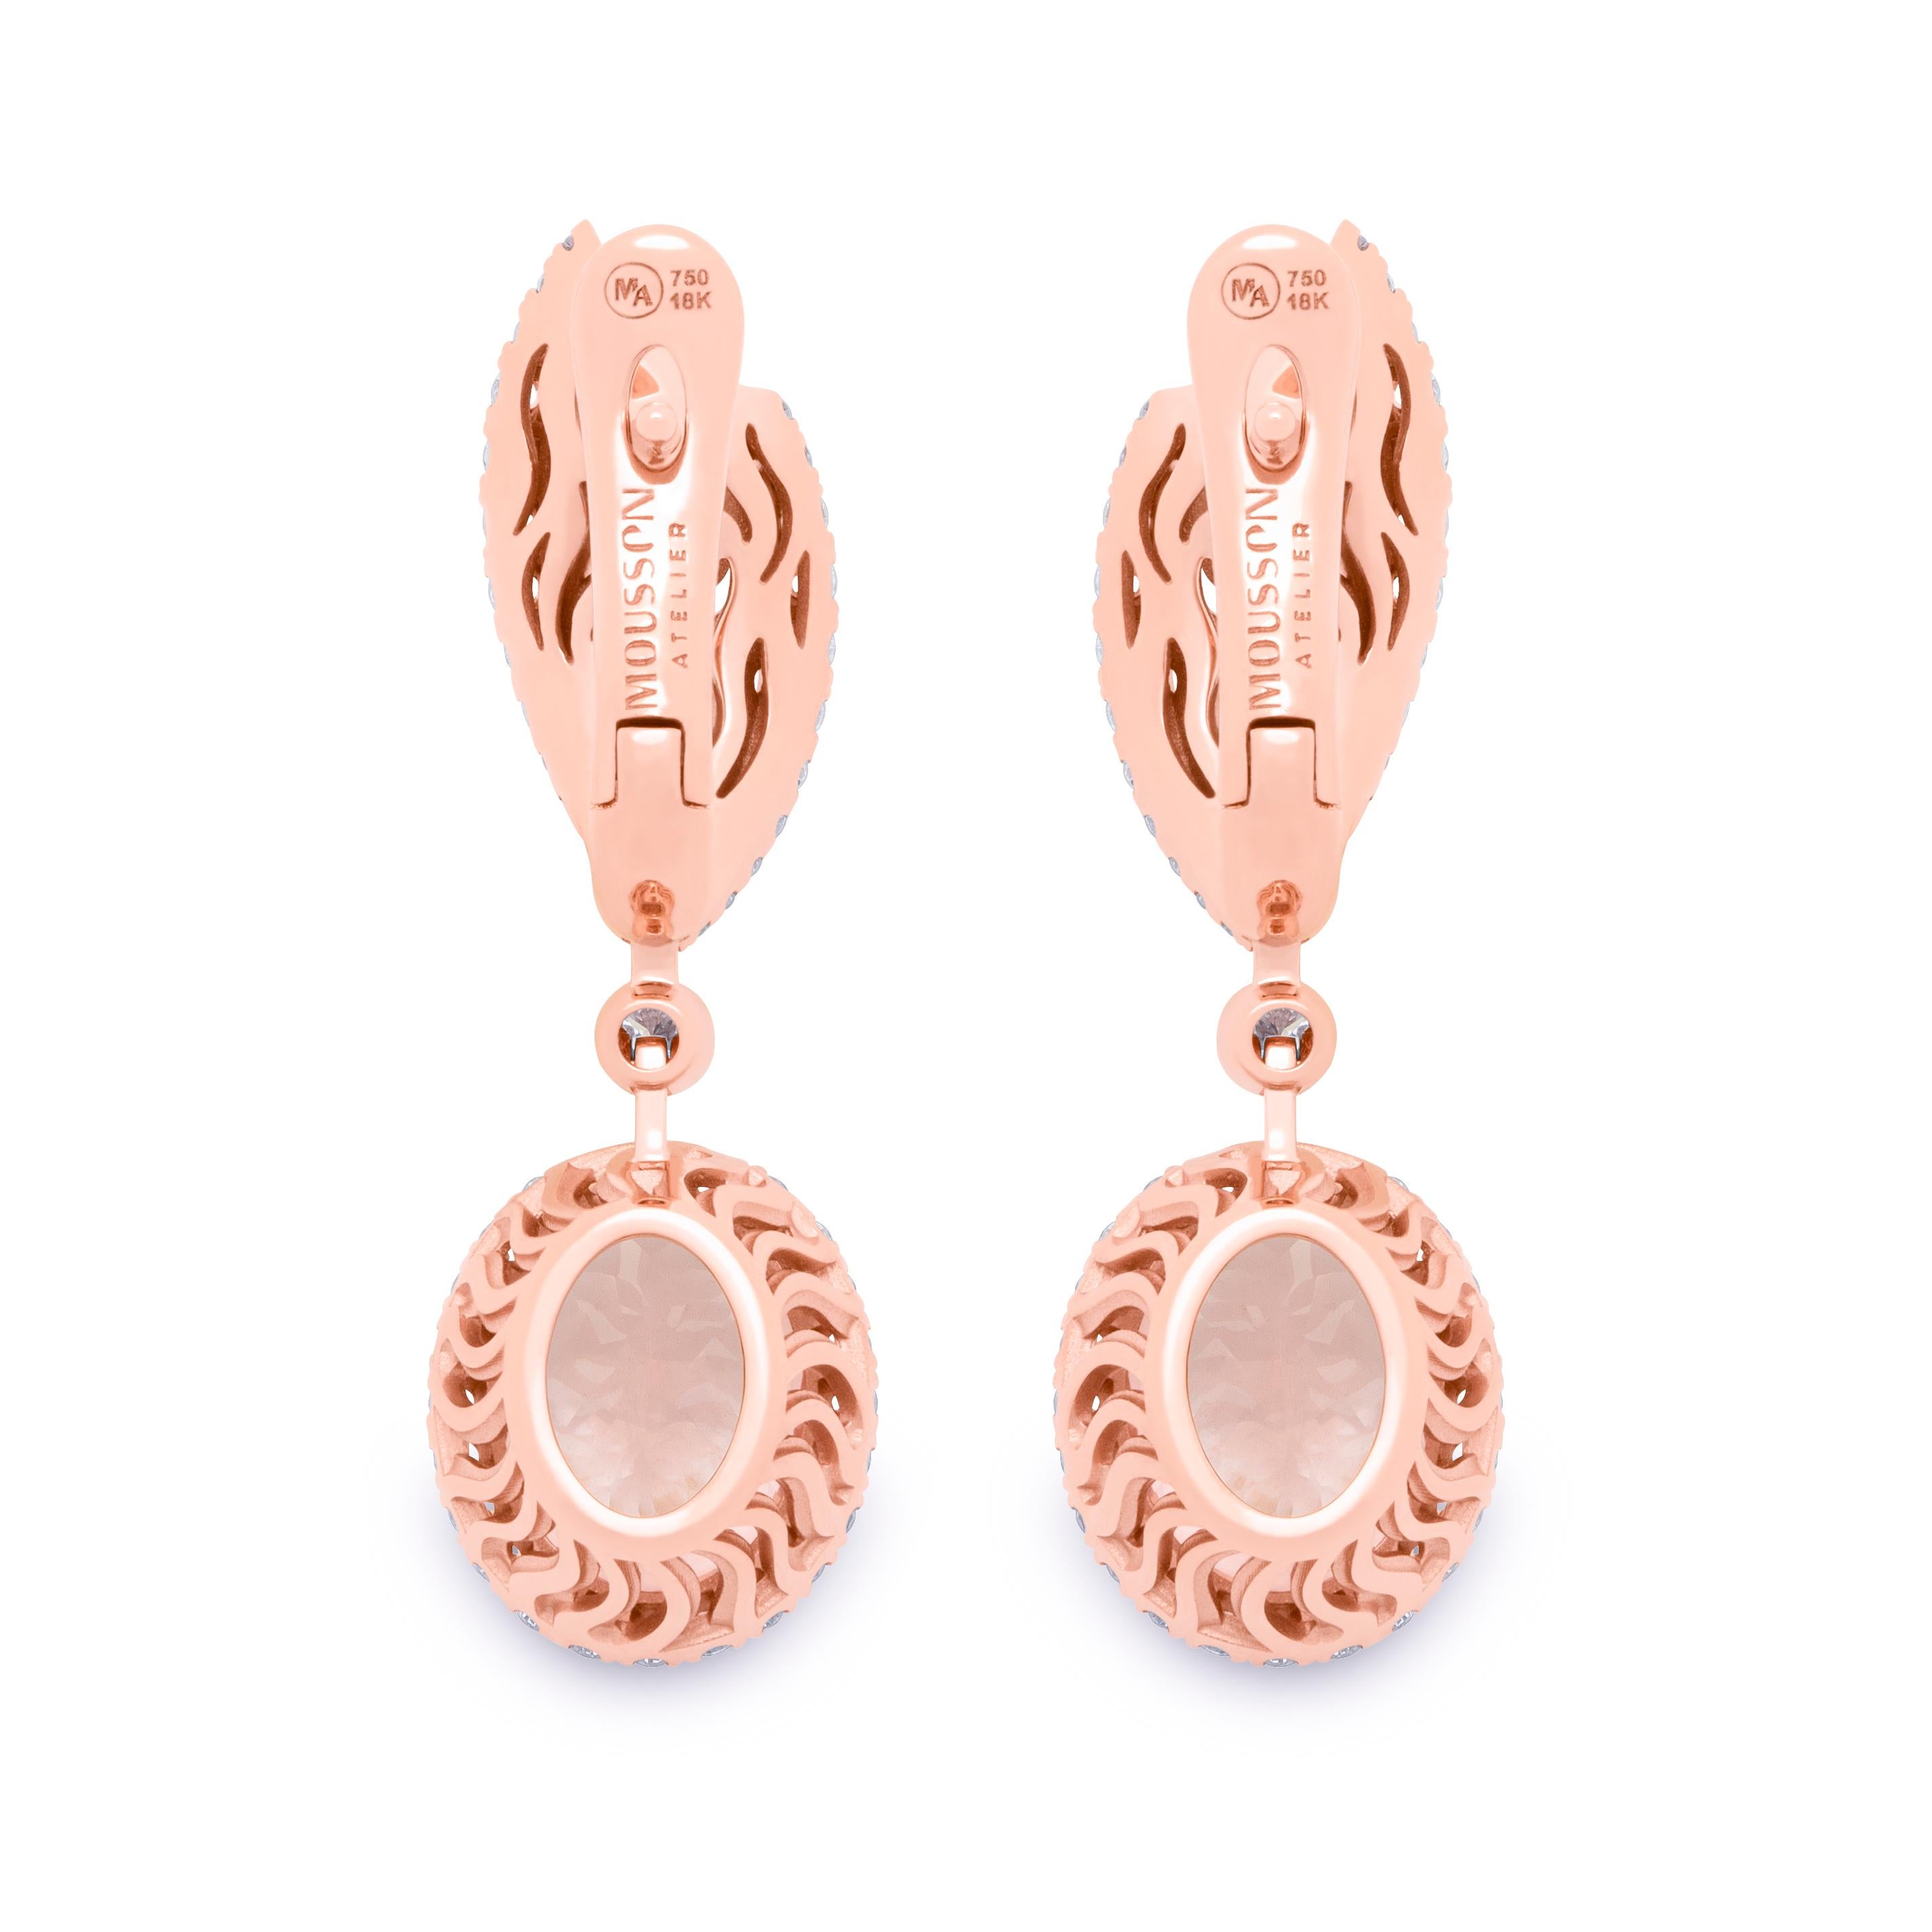 Morganite 5.00 Carat Diamonds 18 Karat Rose Gold New Classic Earrings
We have published a series of new Earrings with the same idea but with different details. Introducing Earrings crafted from 18 Karat Rose Gold, which in a company with two 5.00